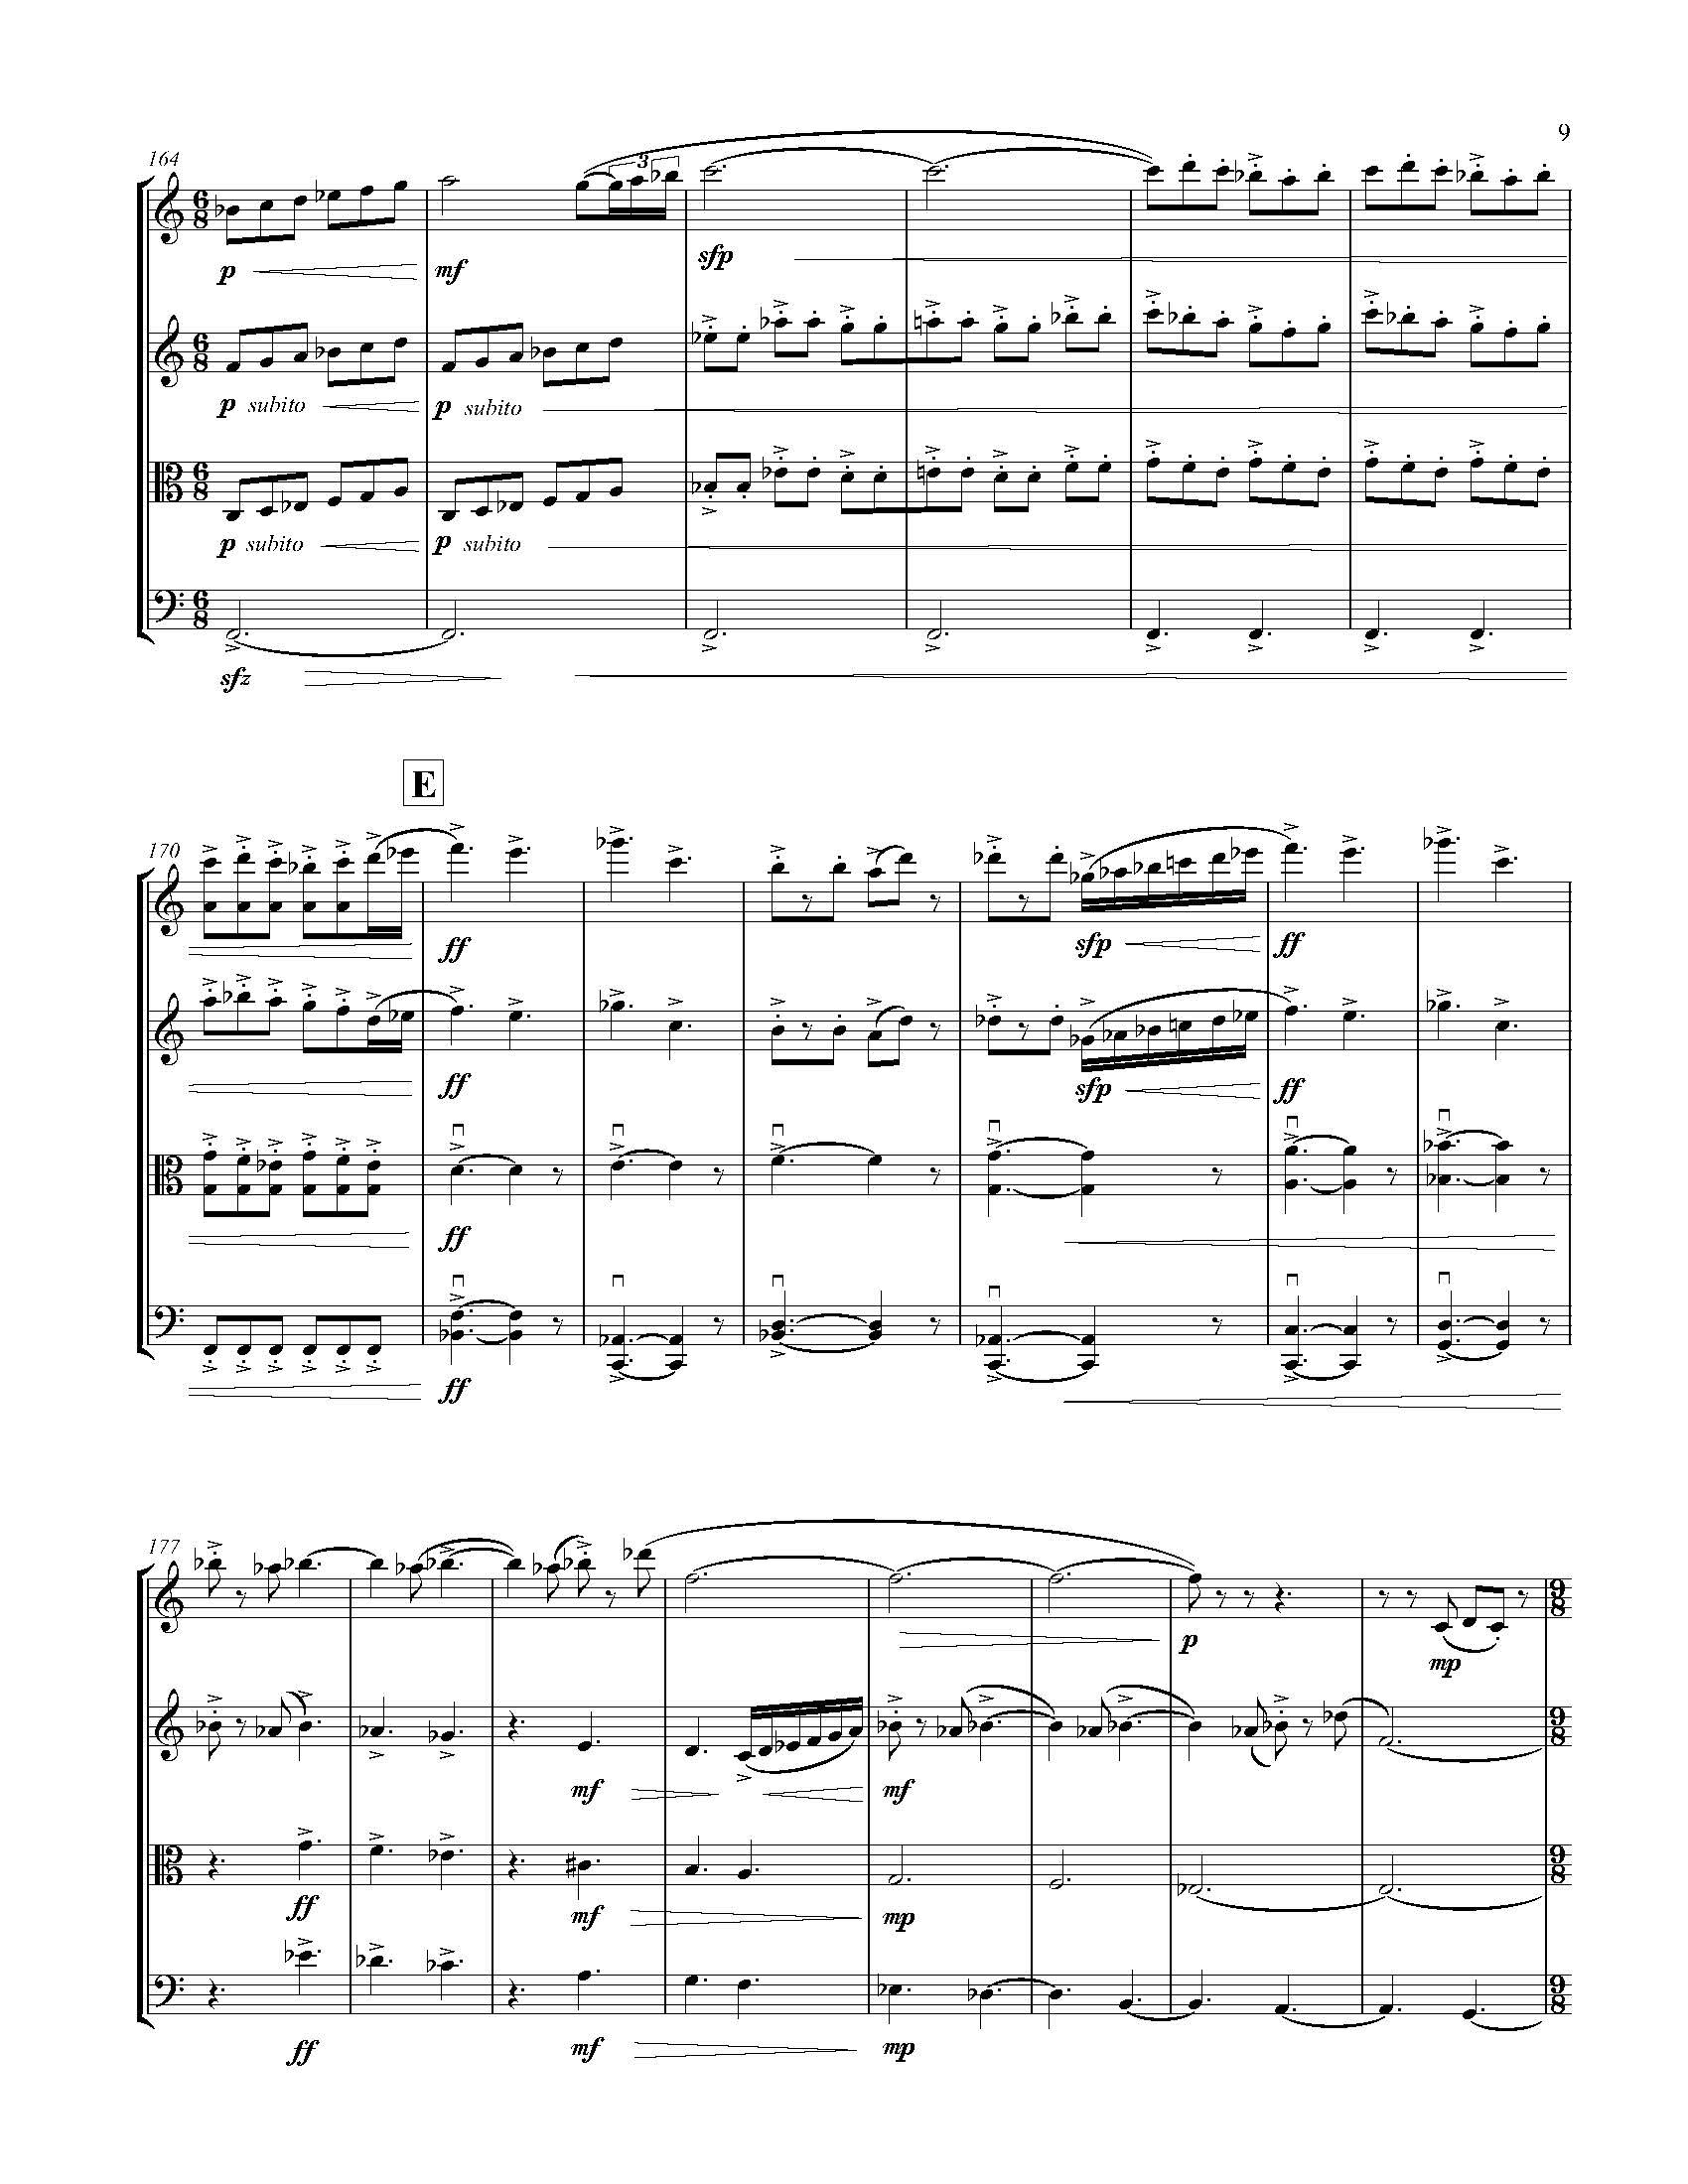 A Country of Vast Designs - Complete Score_Page_15.jpg